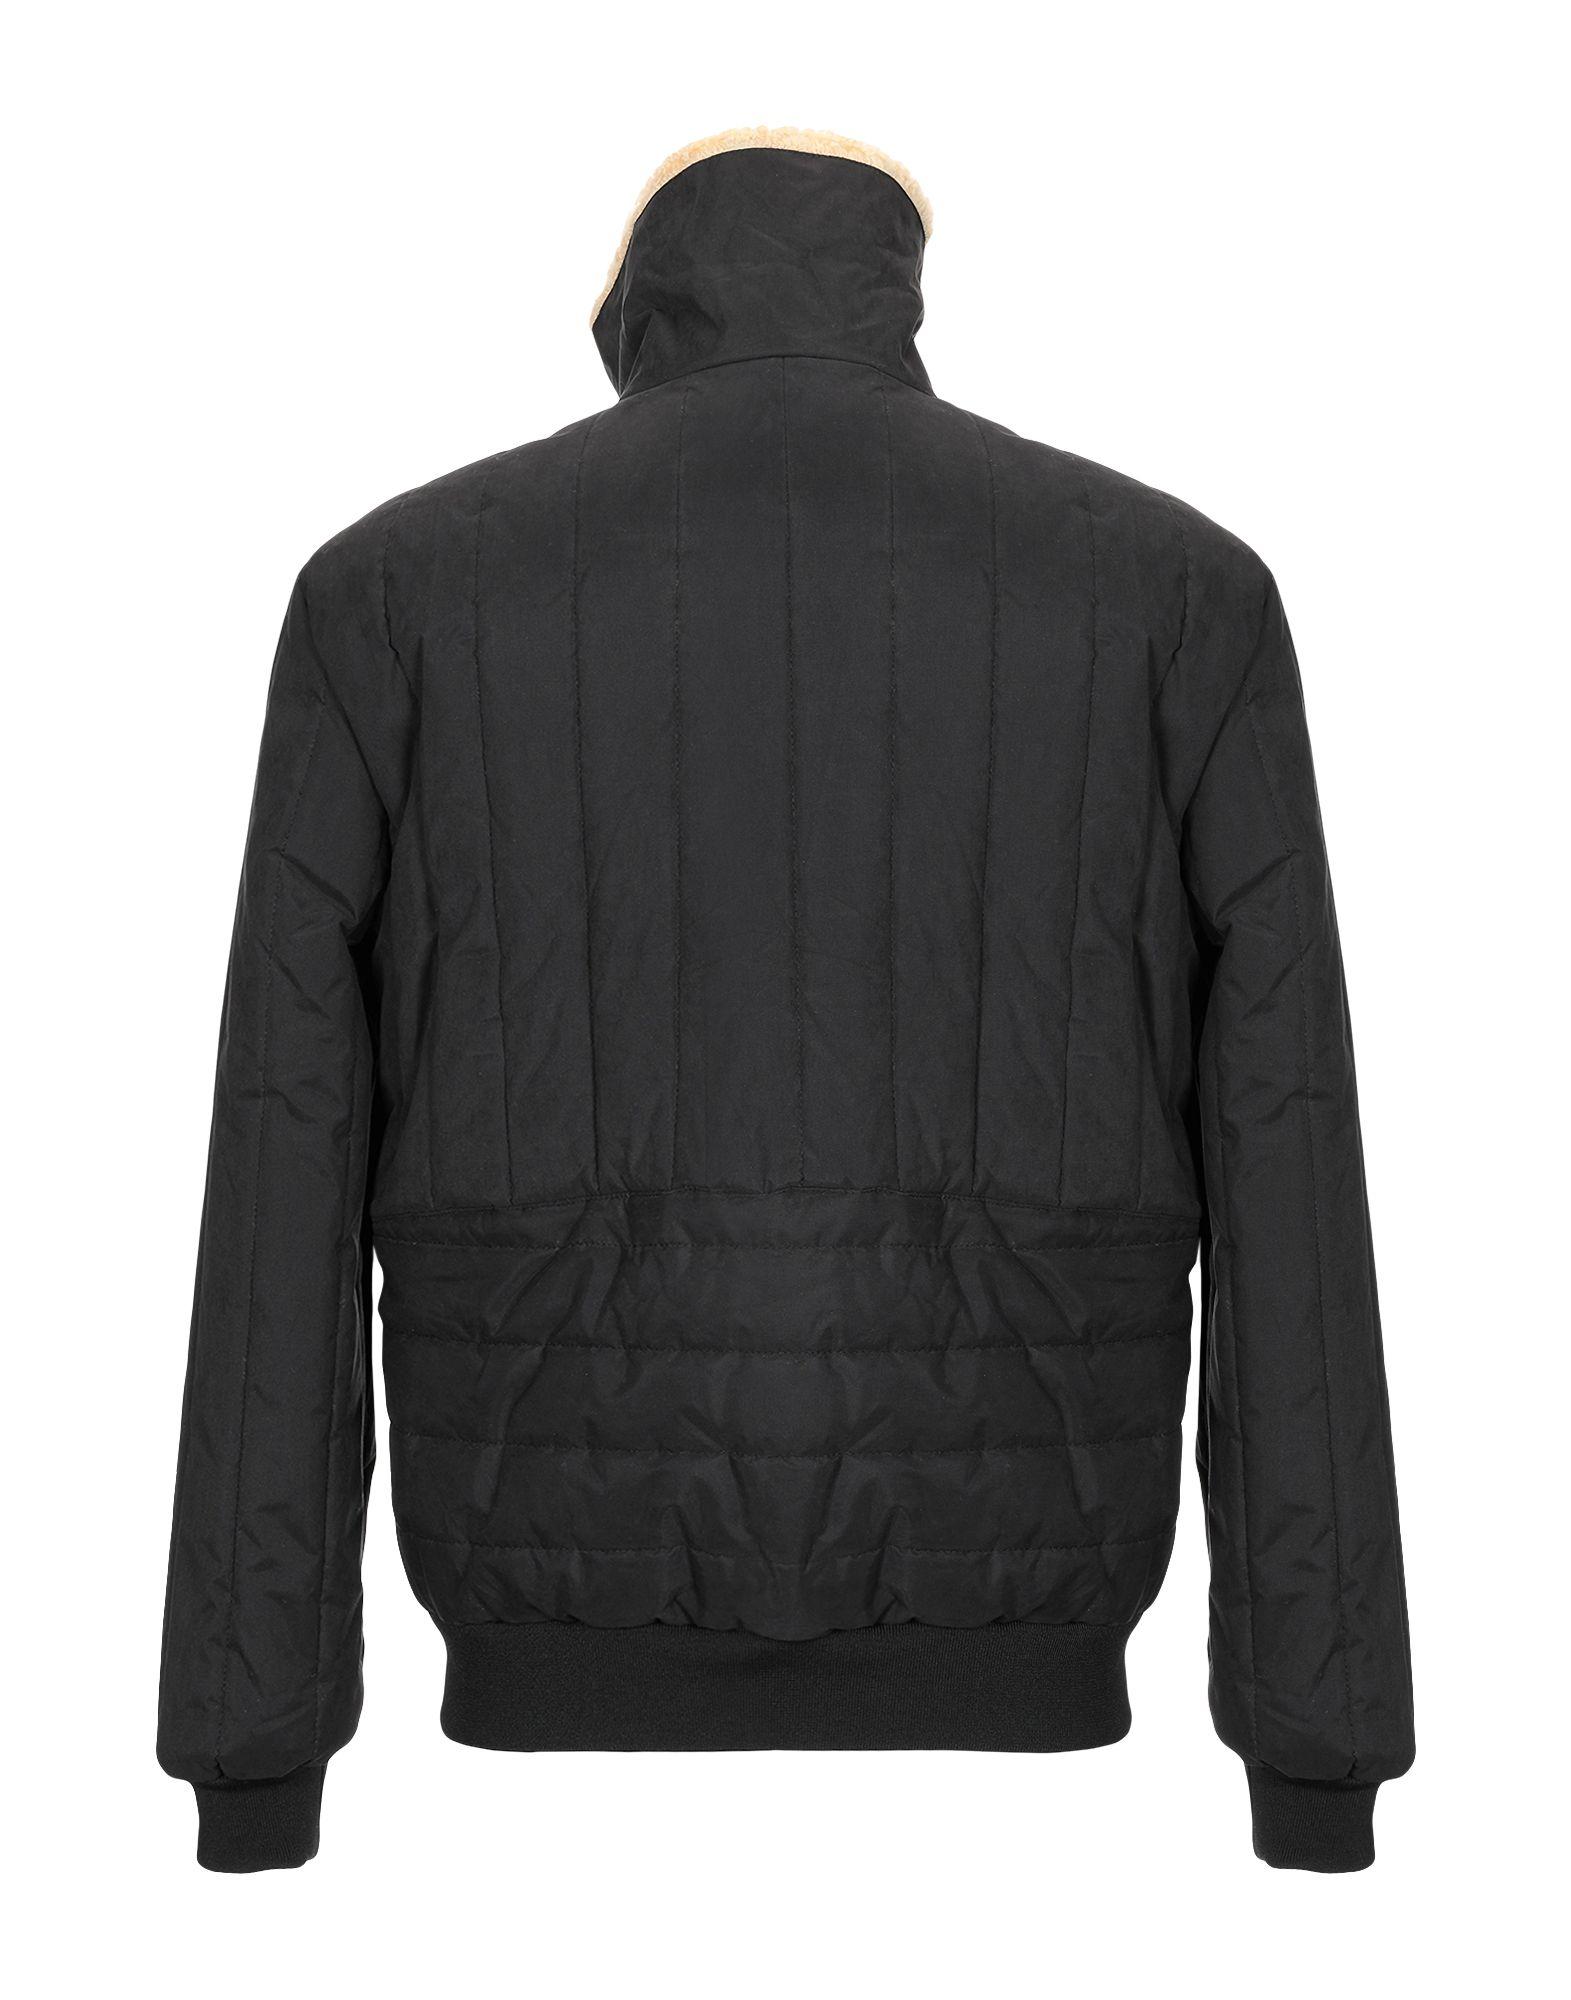 Class Roberto Cavalli Synthetic Jacket in Black for Men - Lyst